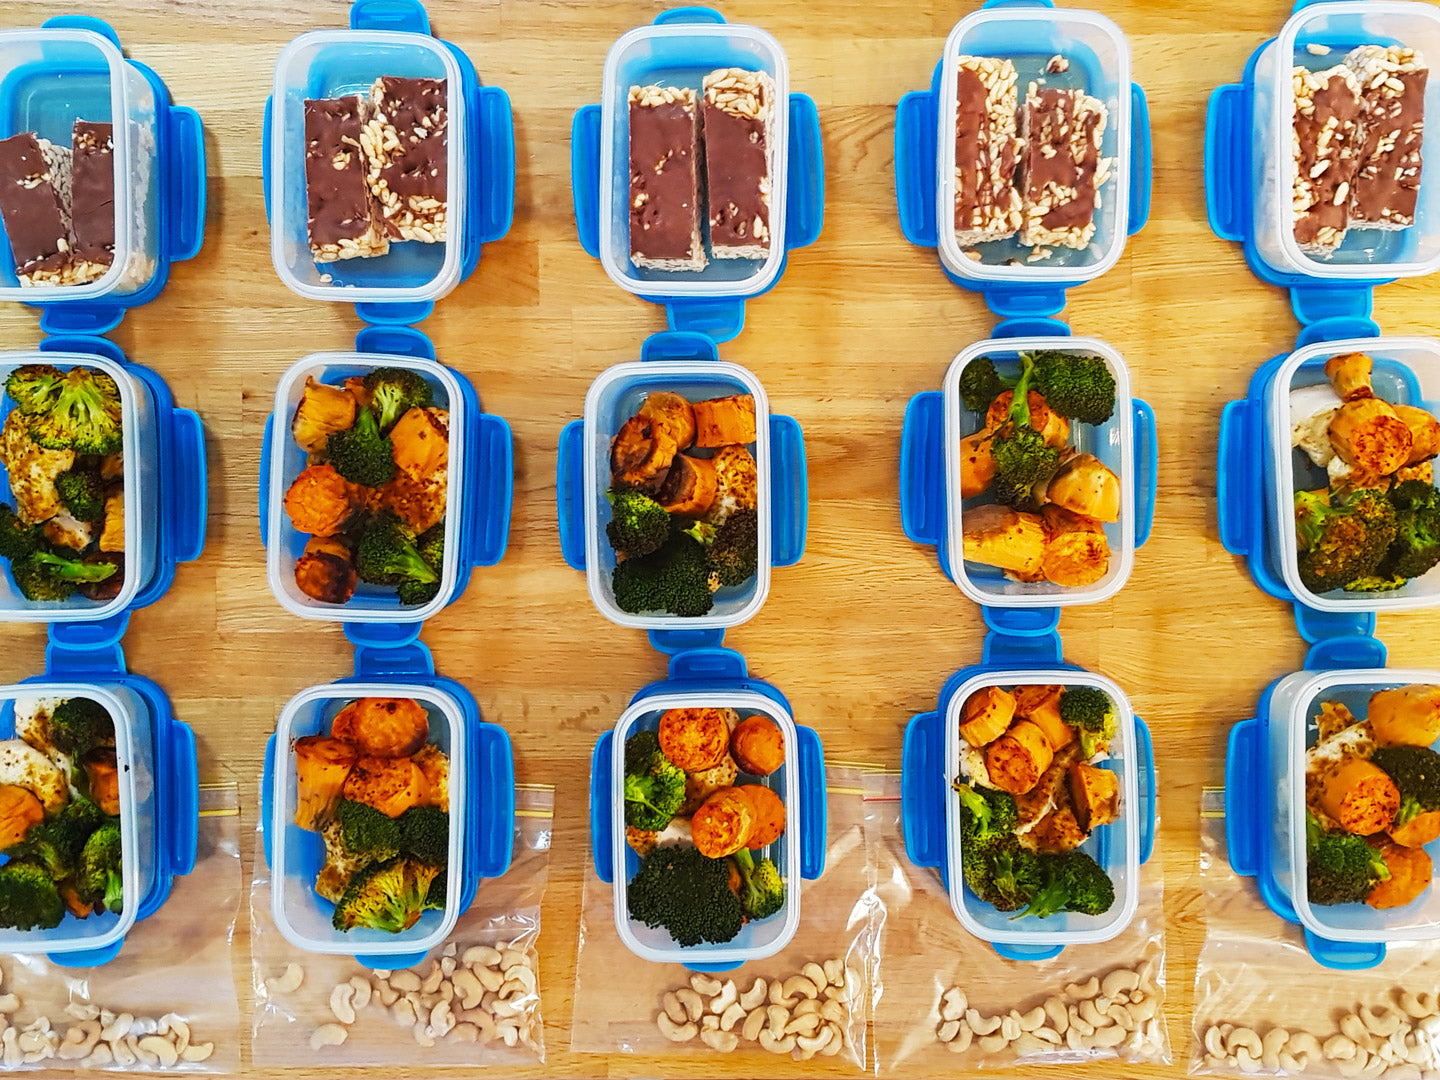 Meal Prep Sunday - 26th August 2018 - 1800 Calories & 6 Meals Per Day